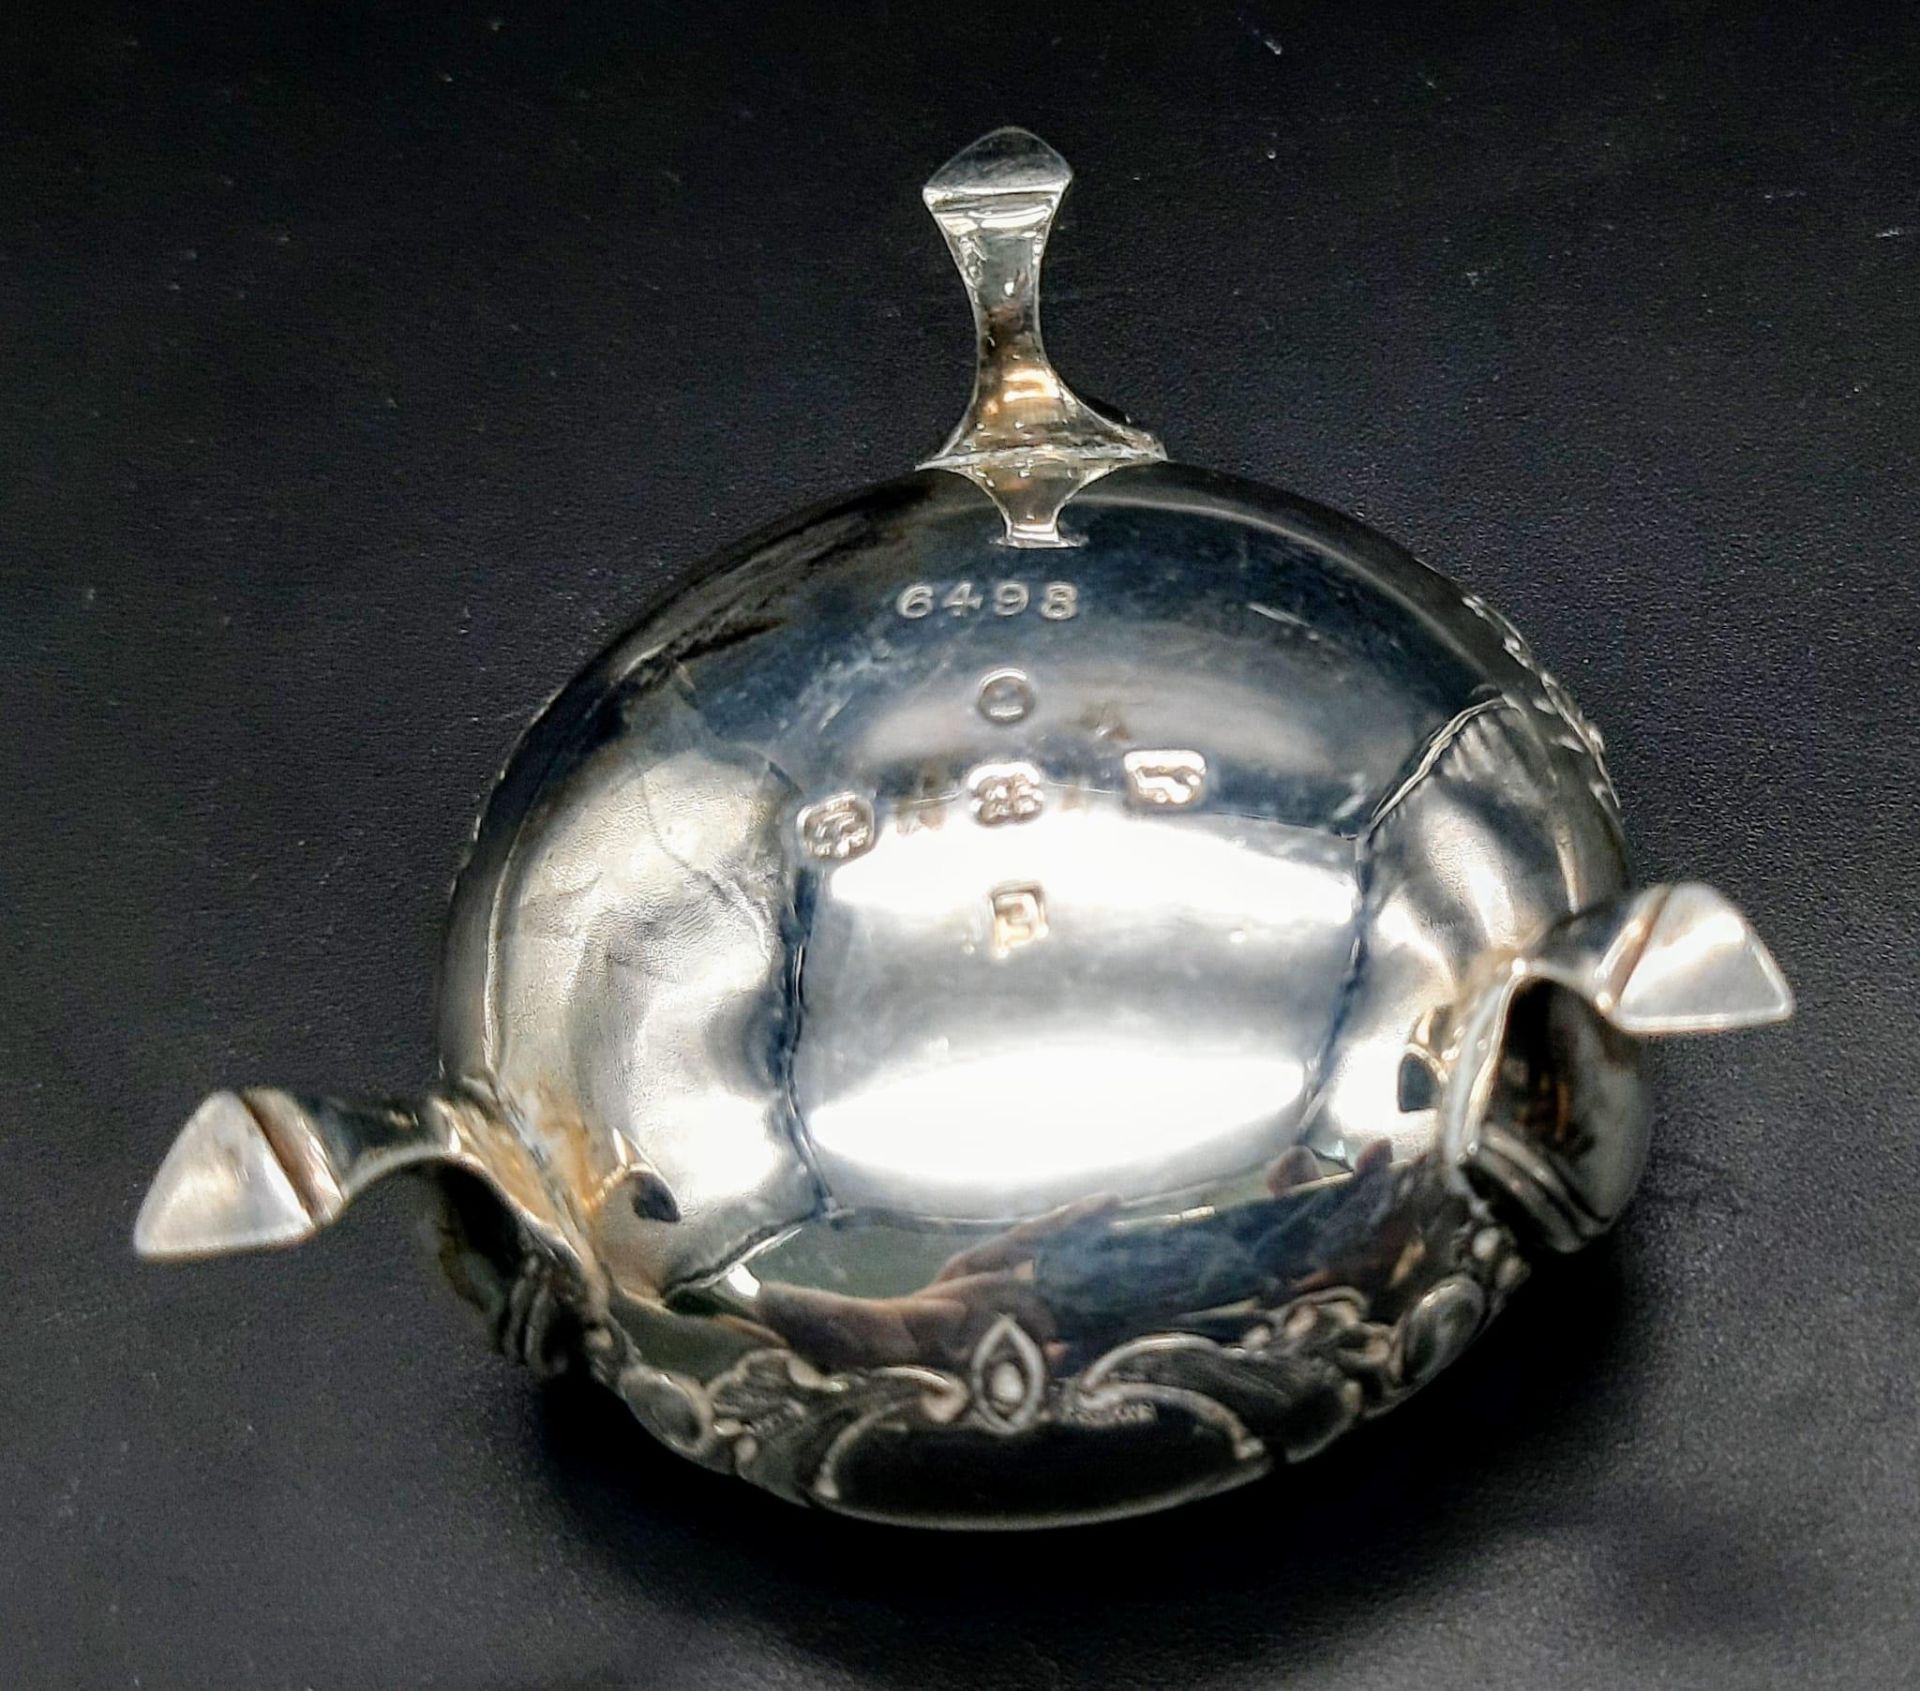 A set of Victorian antique sterling silver salt cellar with nicely floral ornate and silver spoon - Image 3 of 8